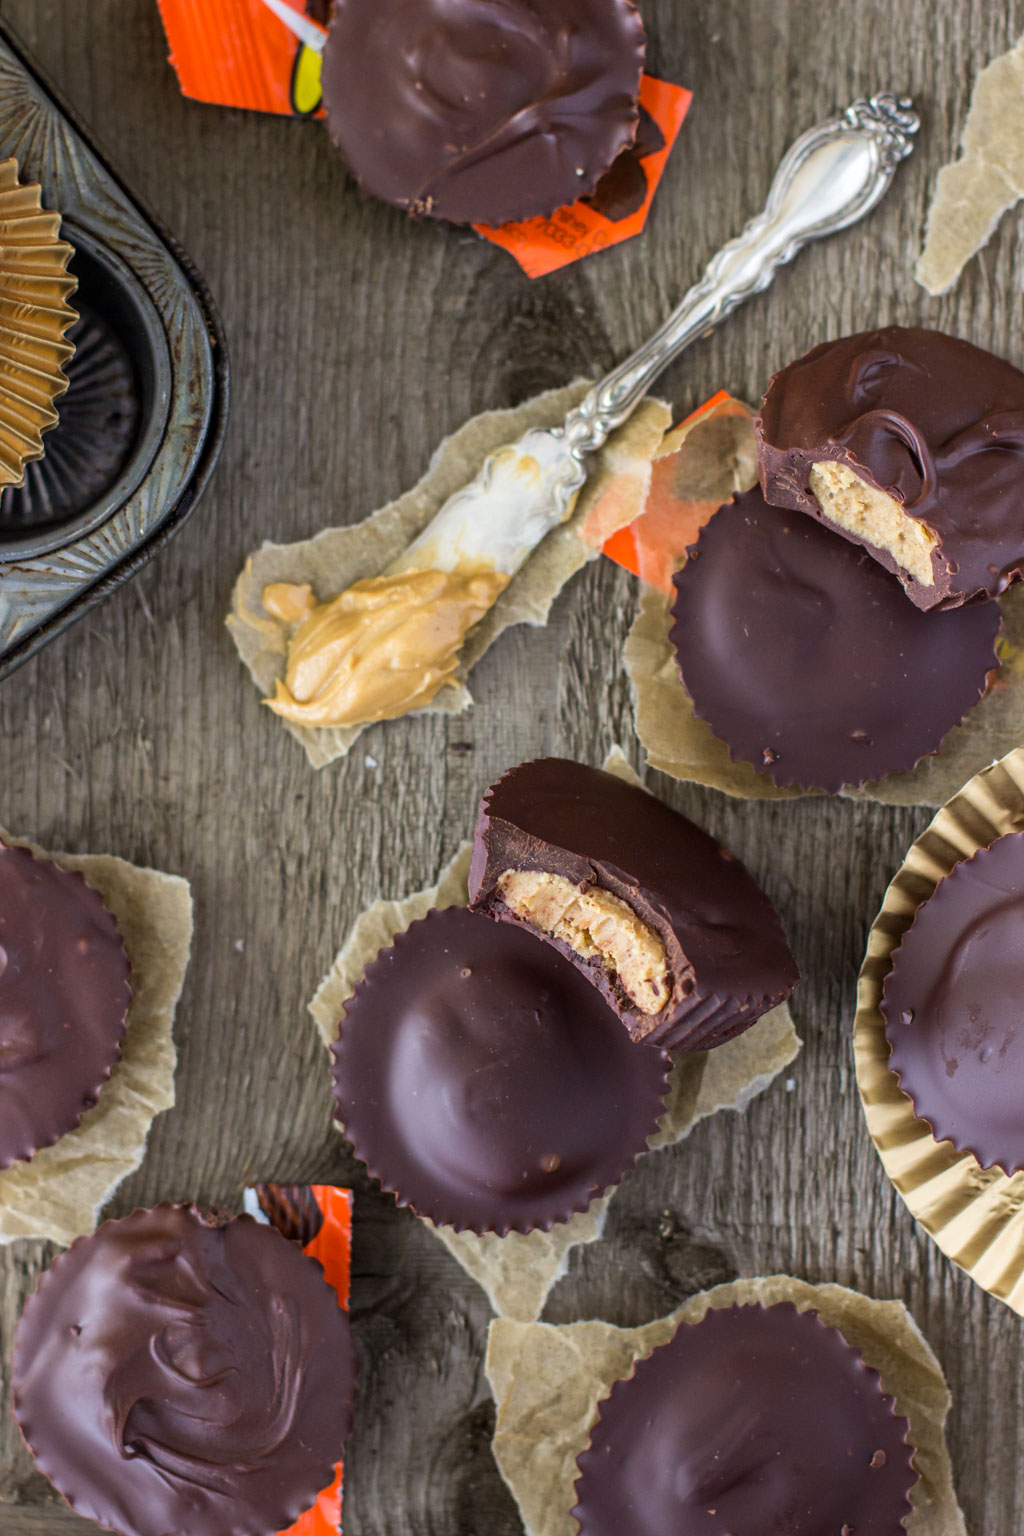 Homemade Reese's Cups! So simple and delicious!